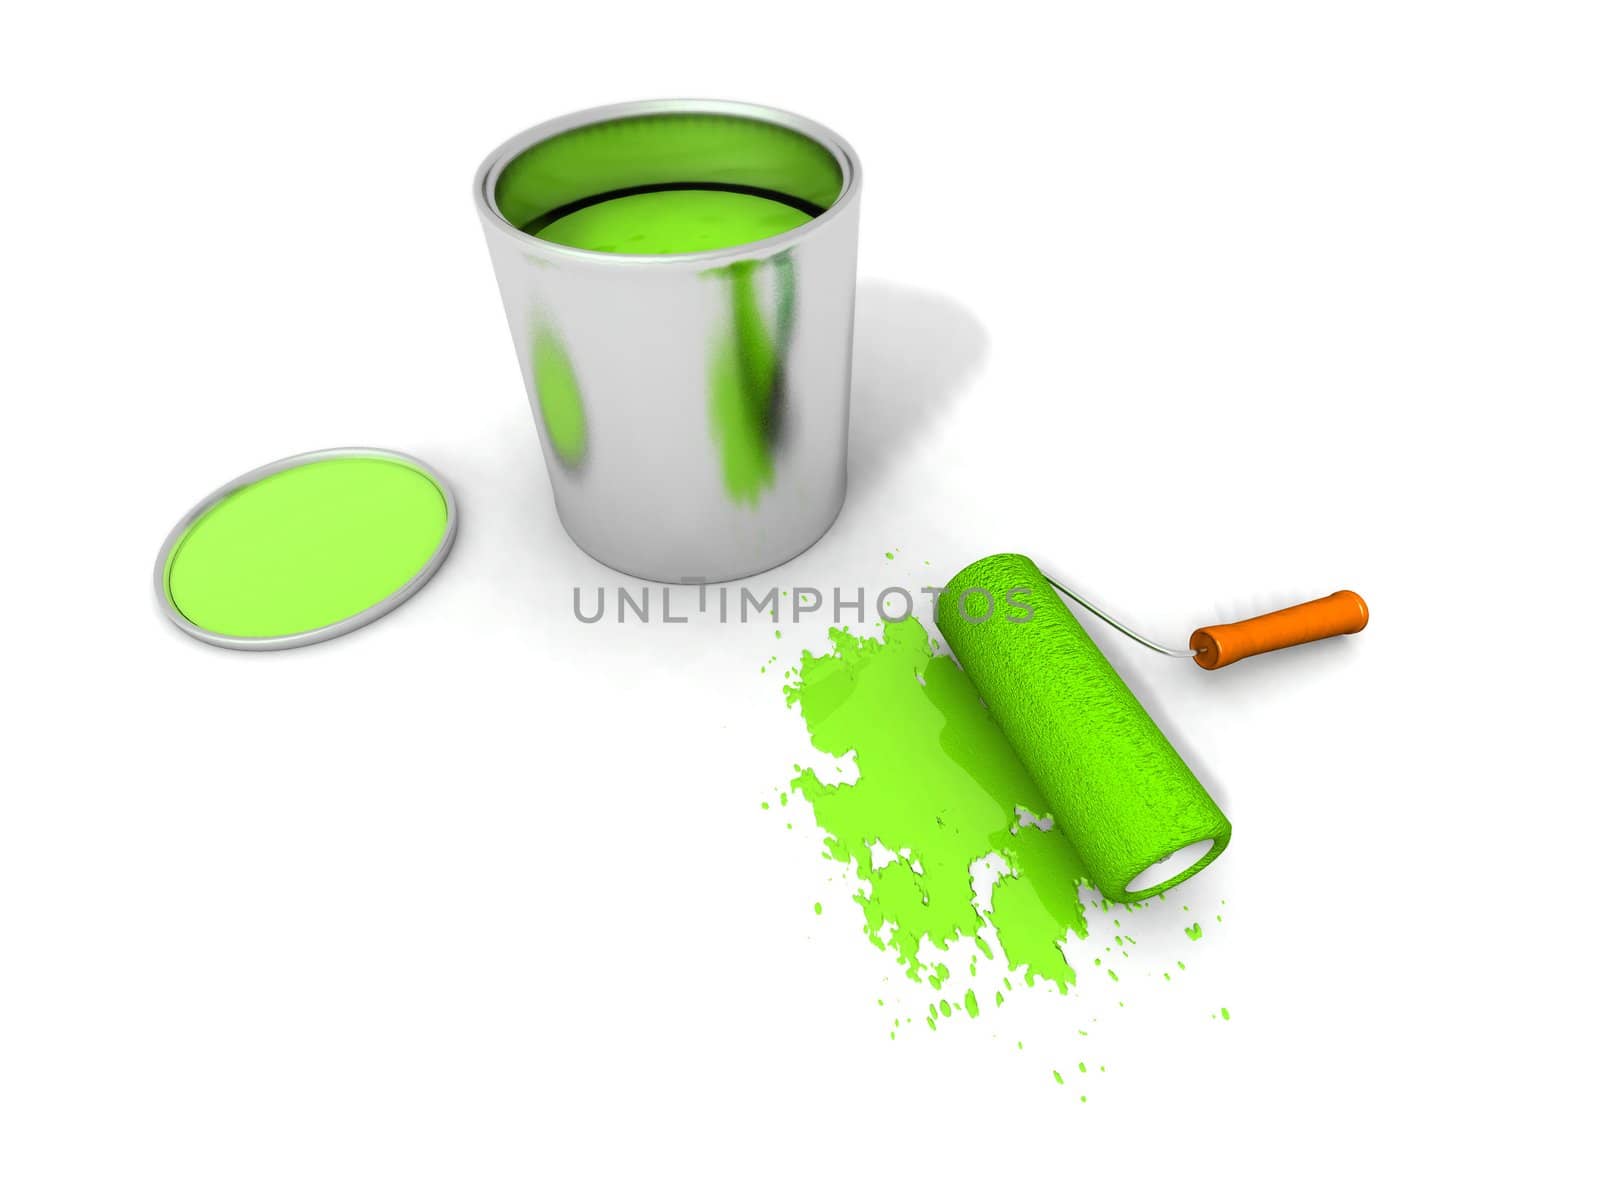 3D render of paint roller, green can and splashing